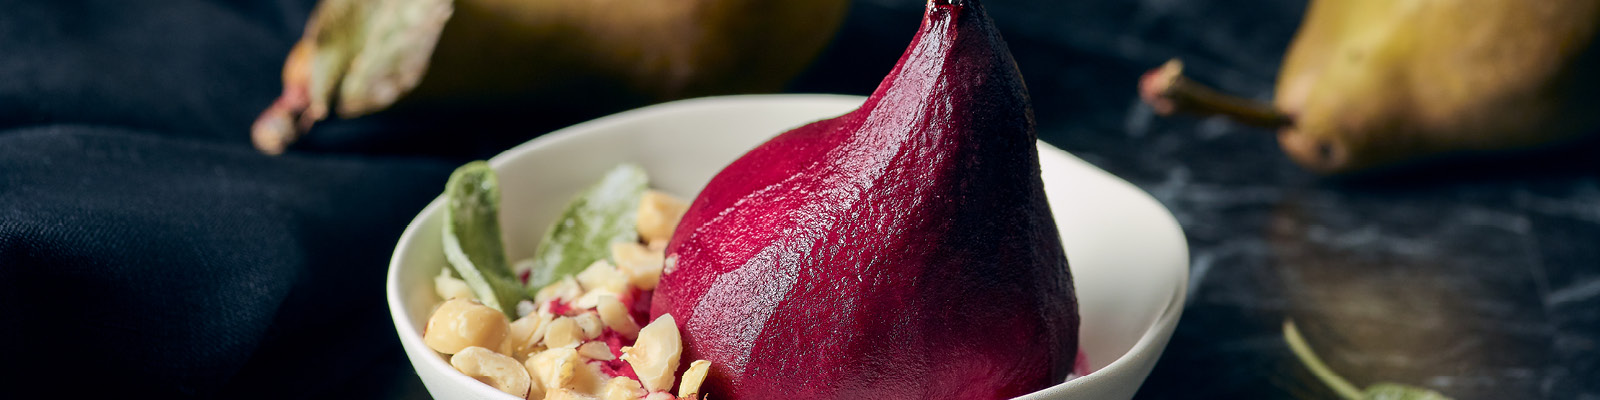 2021 Sept Oct CC_Red Wine Poached Pears_HR_1600x400.jpg